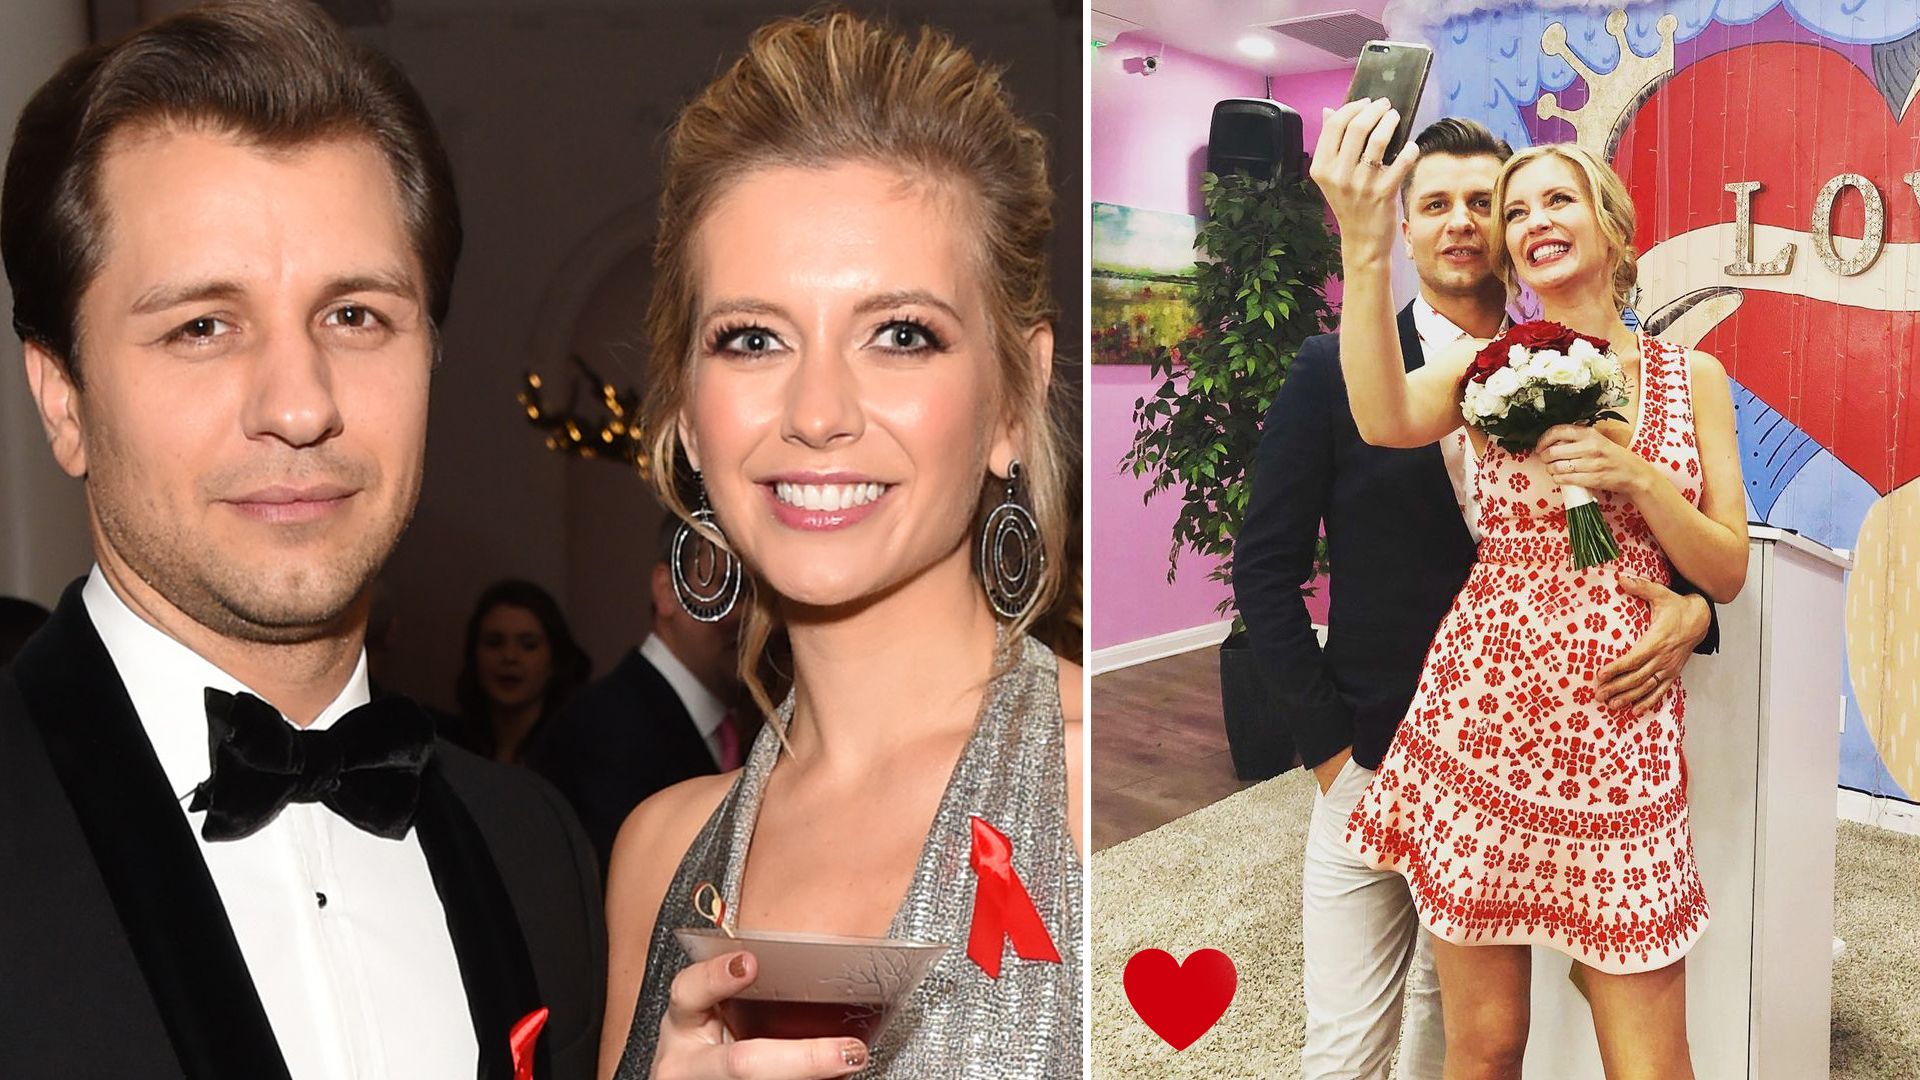 Rachel Riley and Pasha Kovalev smiling on the red carpet and taking a selfie on their wedding day